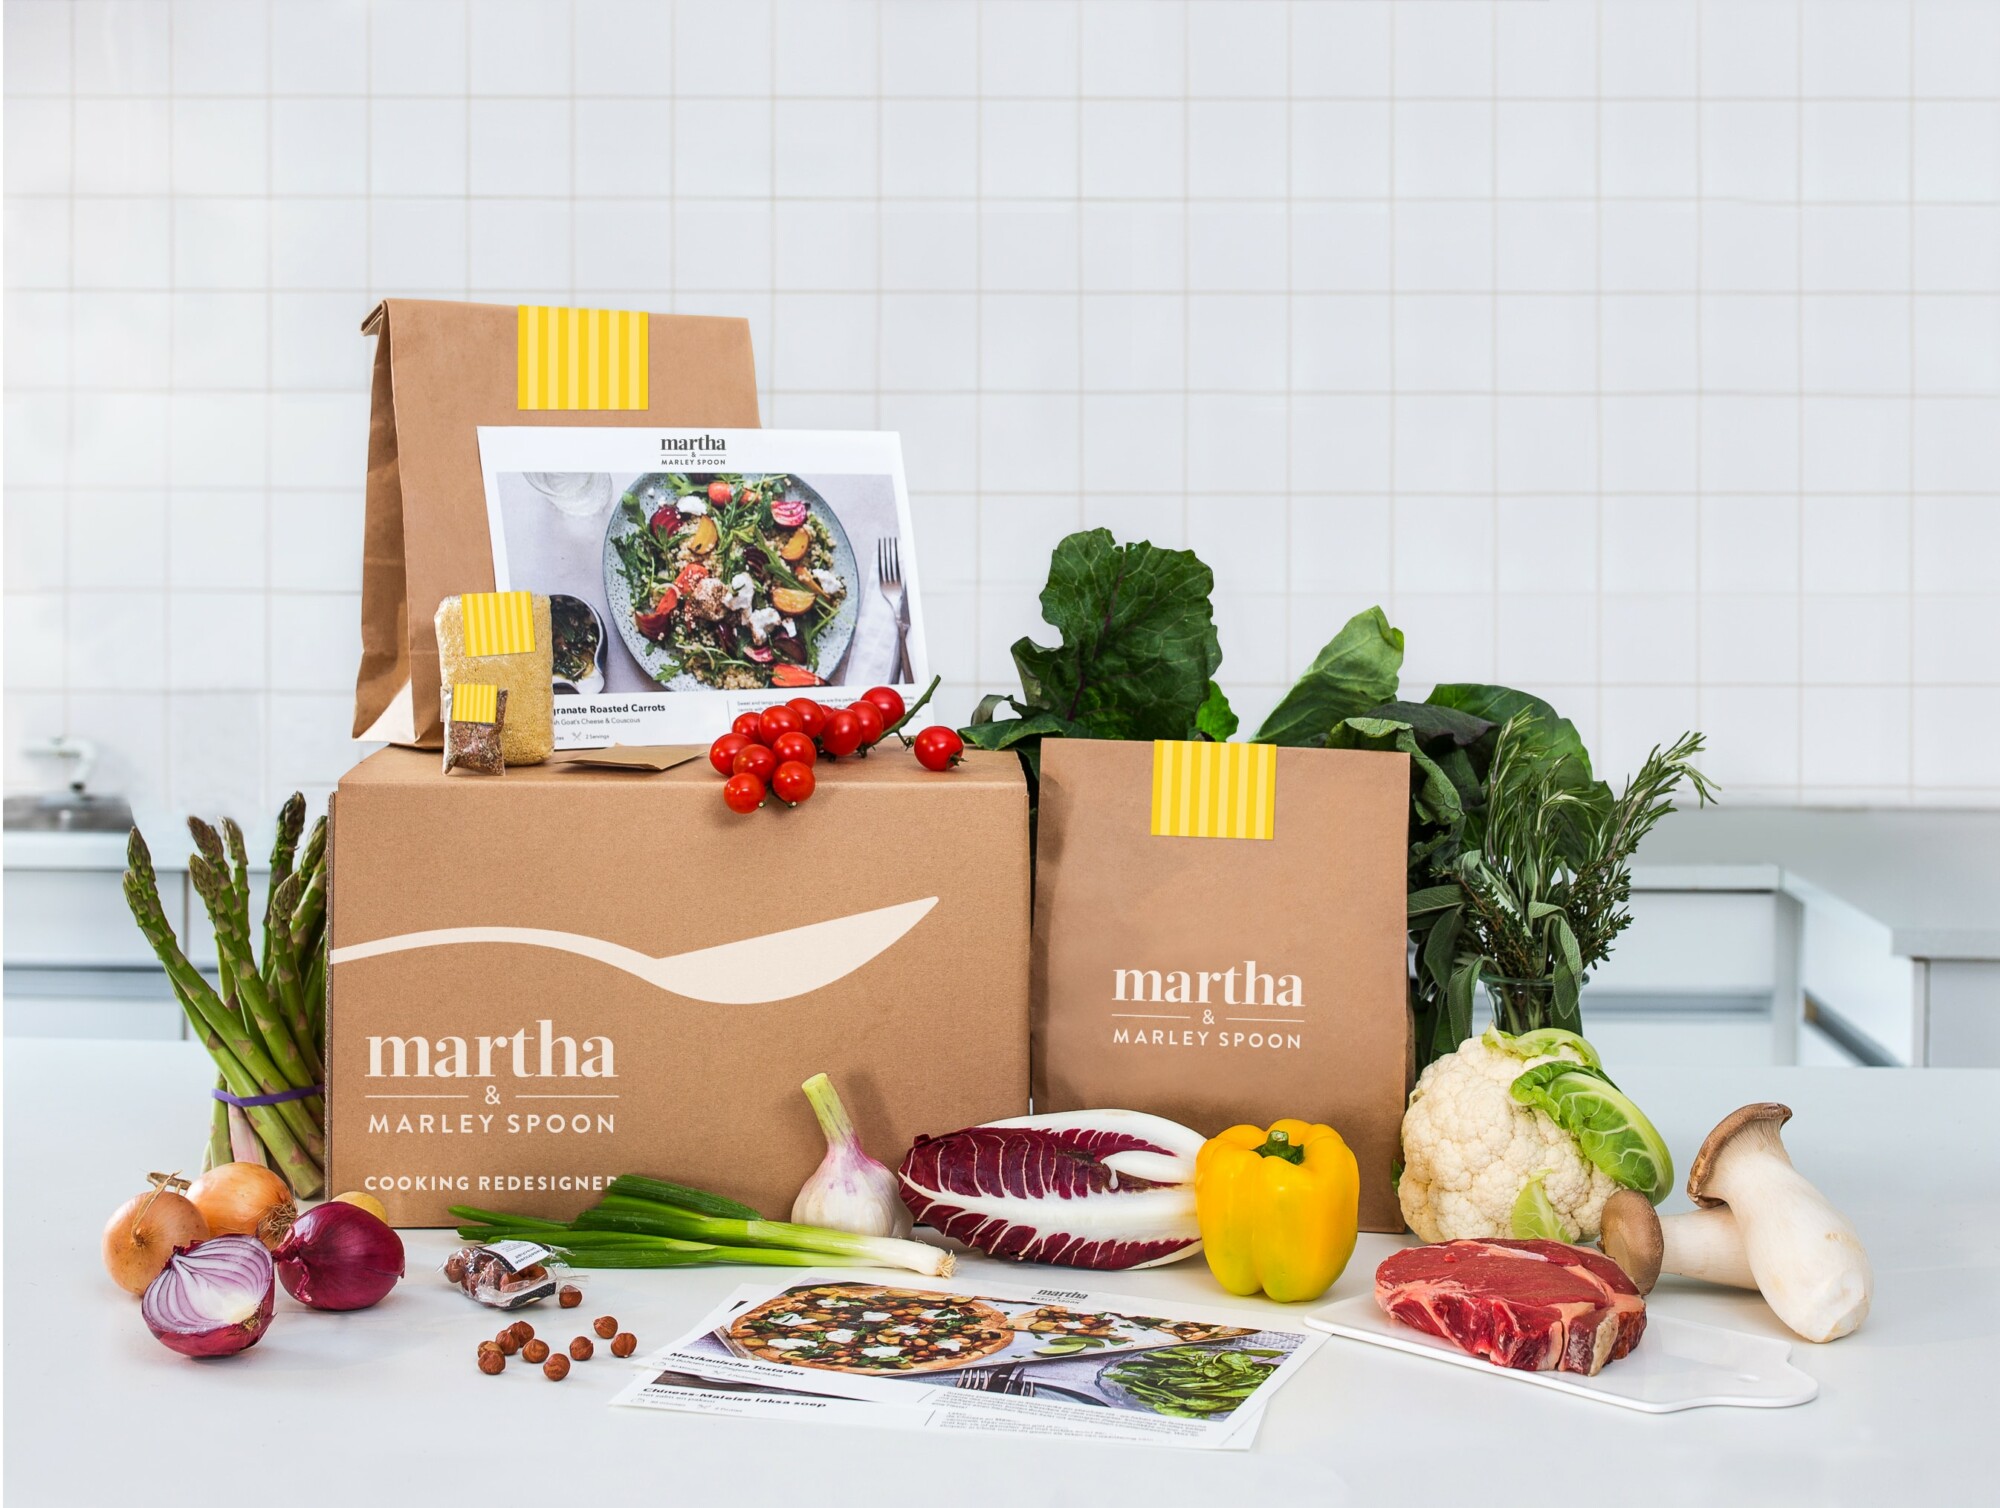 Martha Stewart's Marley Spoon meal plan service reviewed by Career Insight Studio